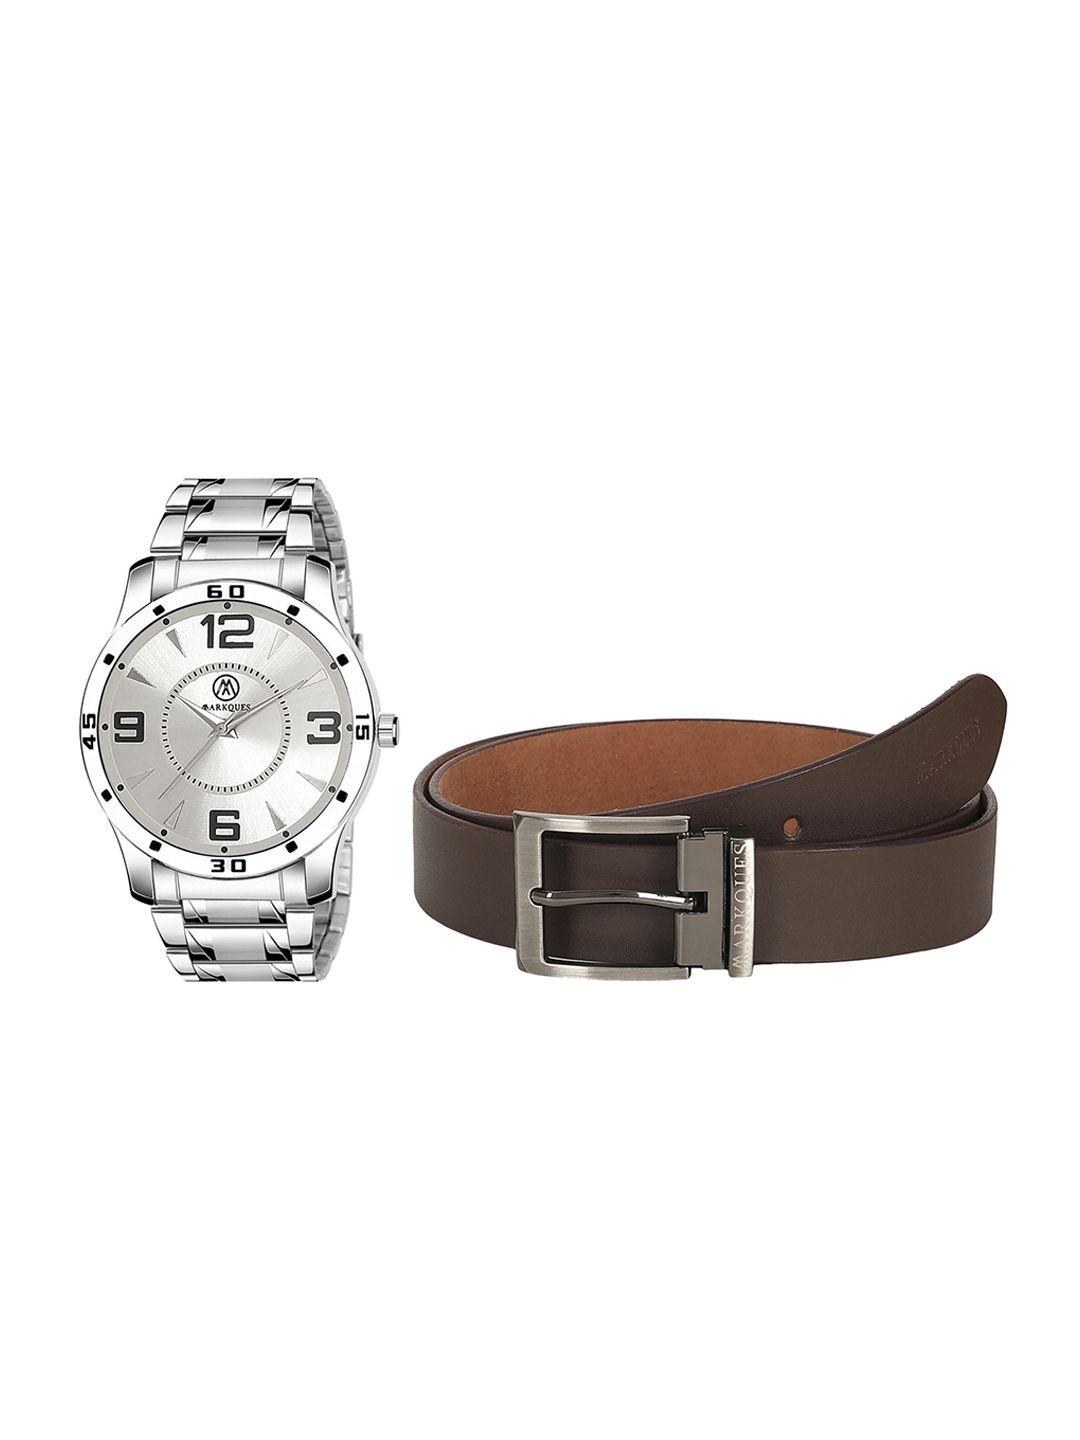 markques men watch and belt accessory gift set